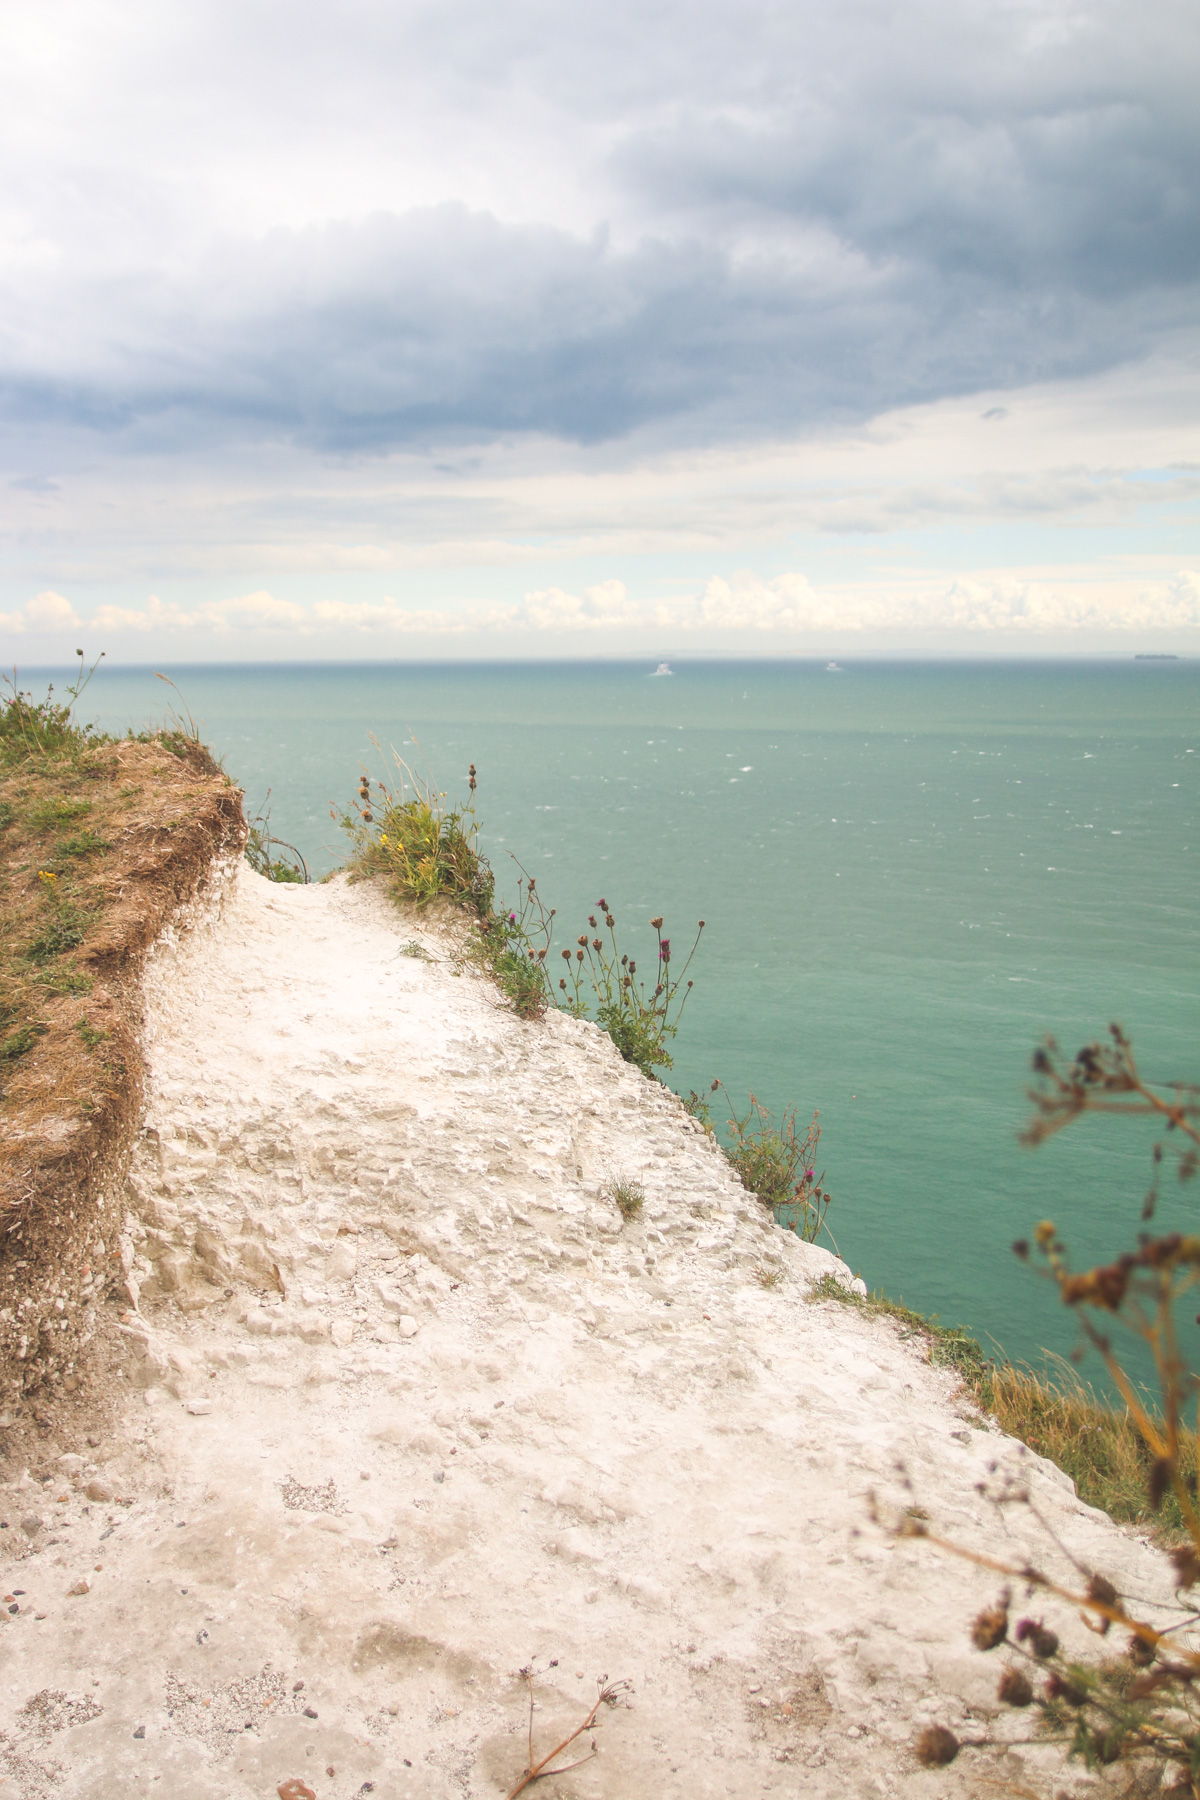 Hiking Trails at White Cliffs of Dover